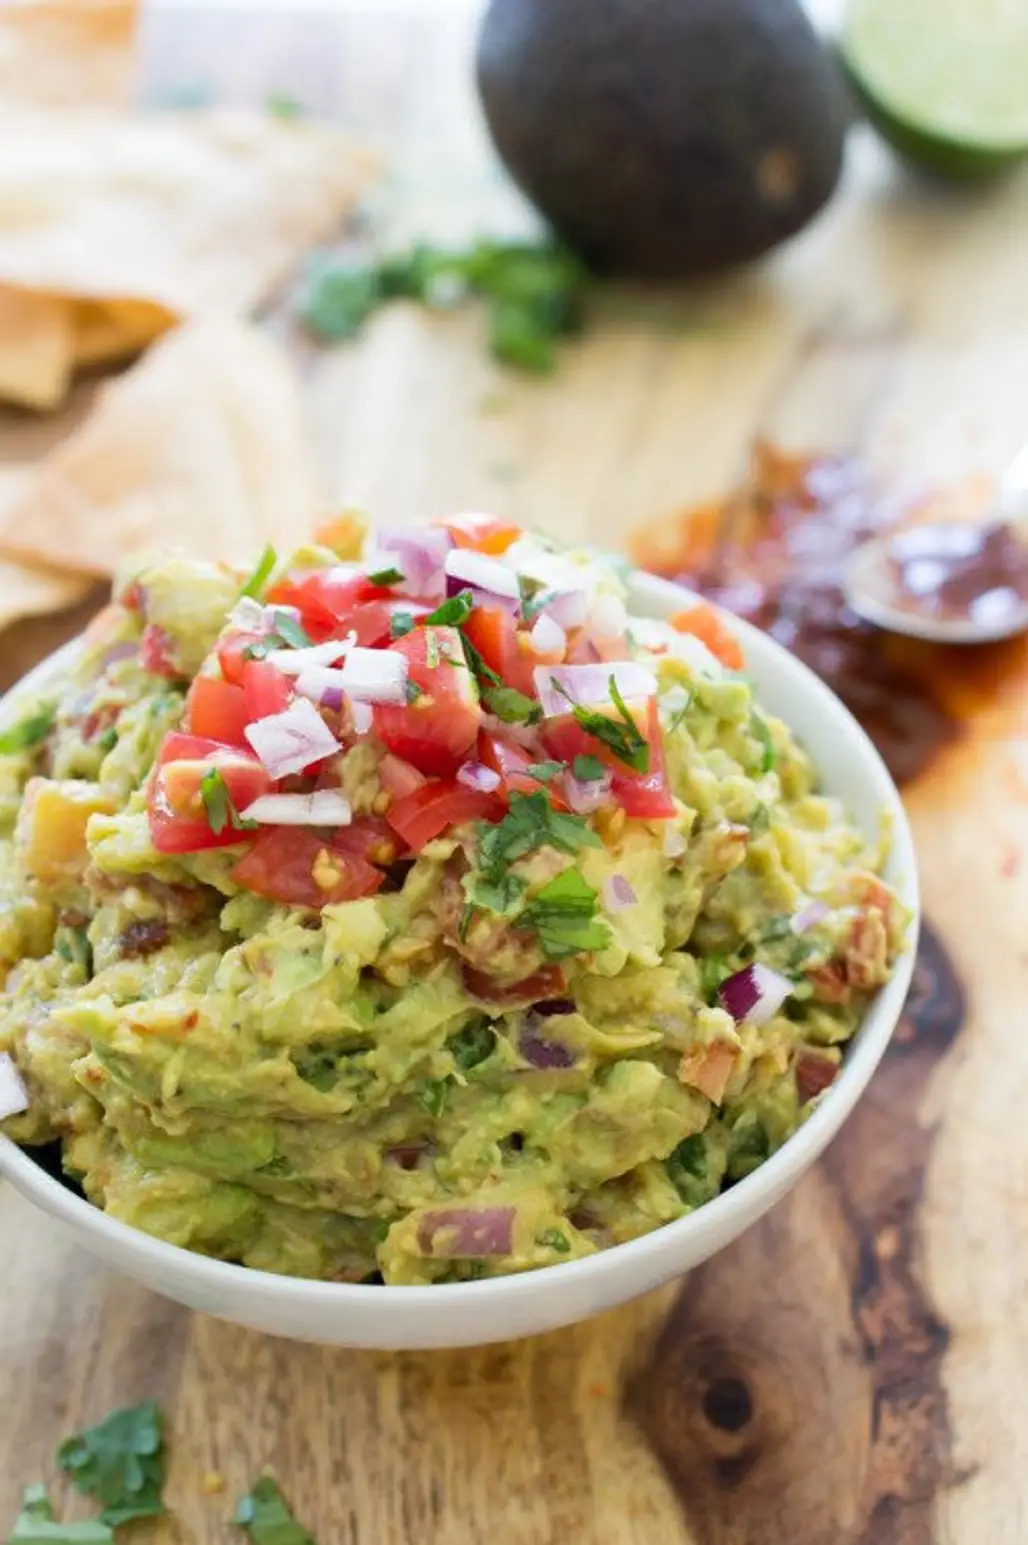 Whip up a Batch of Chips and Guacamole